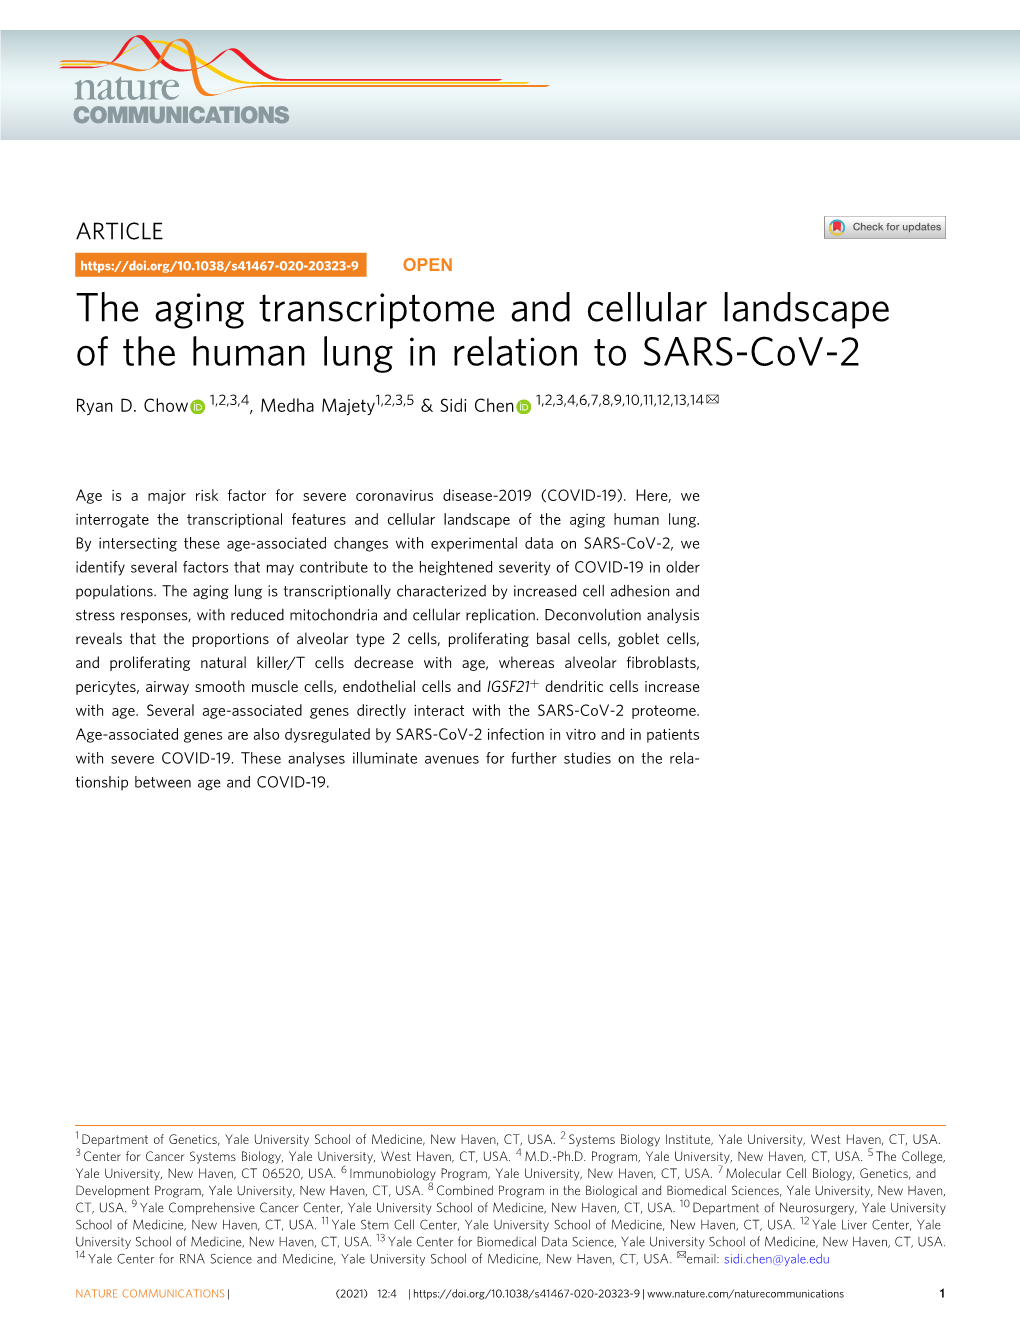 The Aging Transcriptome and Cellular Landscape of the Human Lung in Relation to SARS-Cov-2 ✉ Ryan D